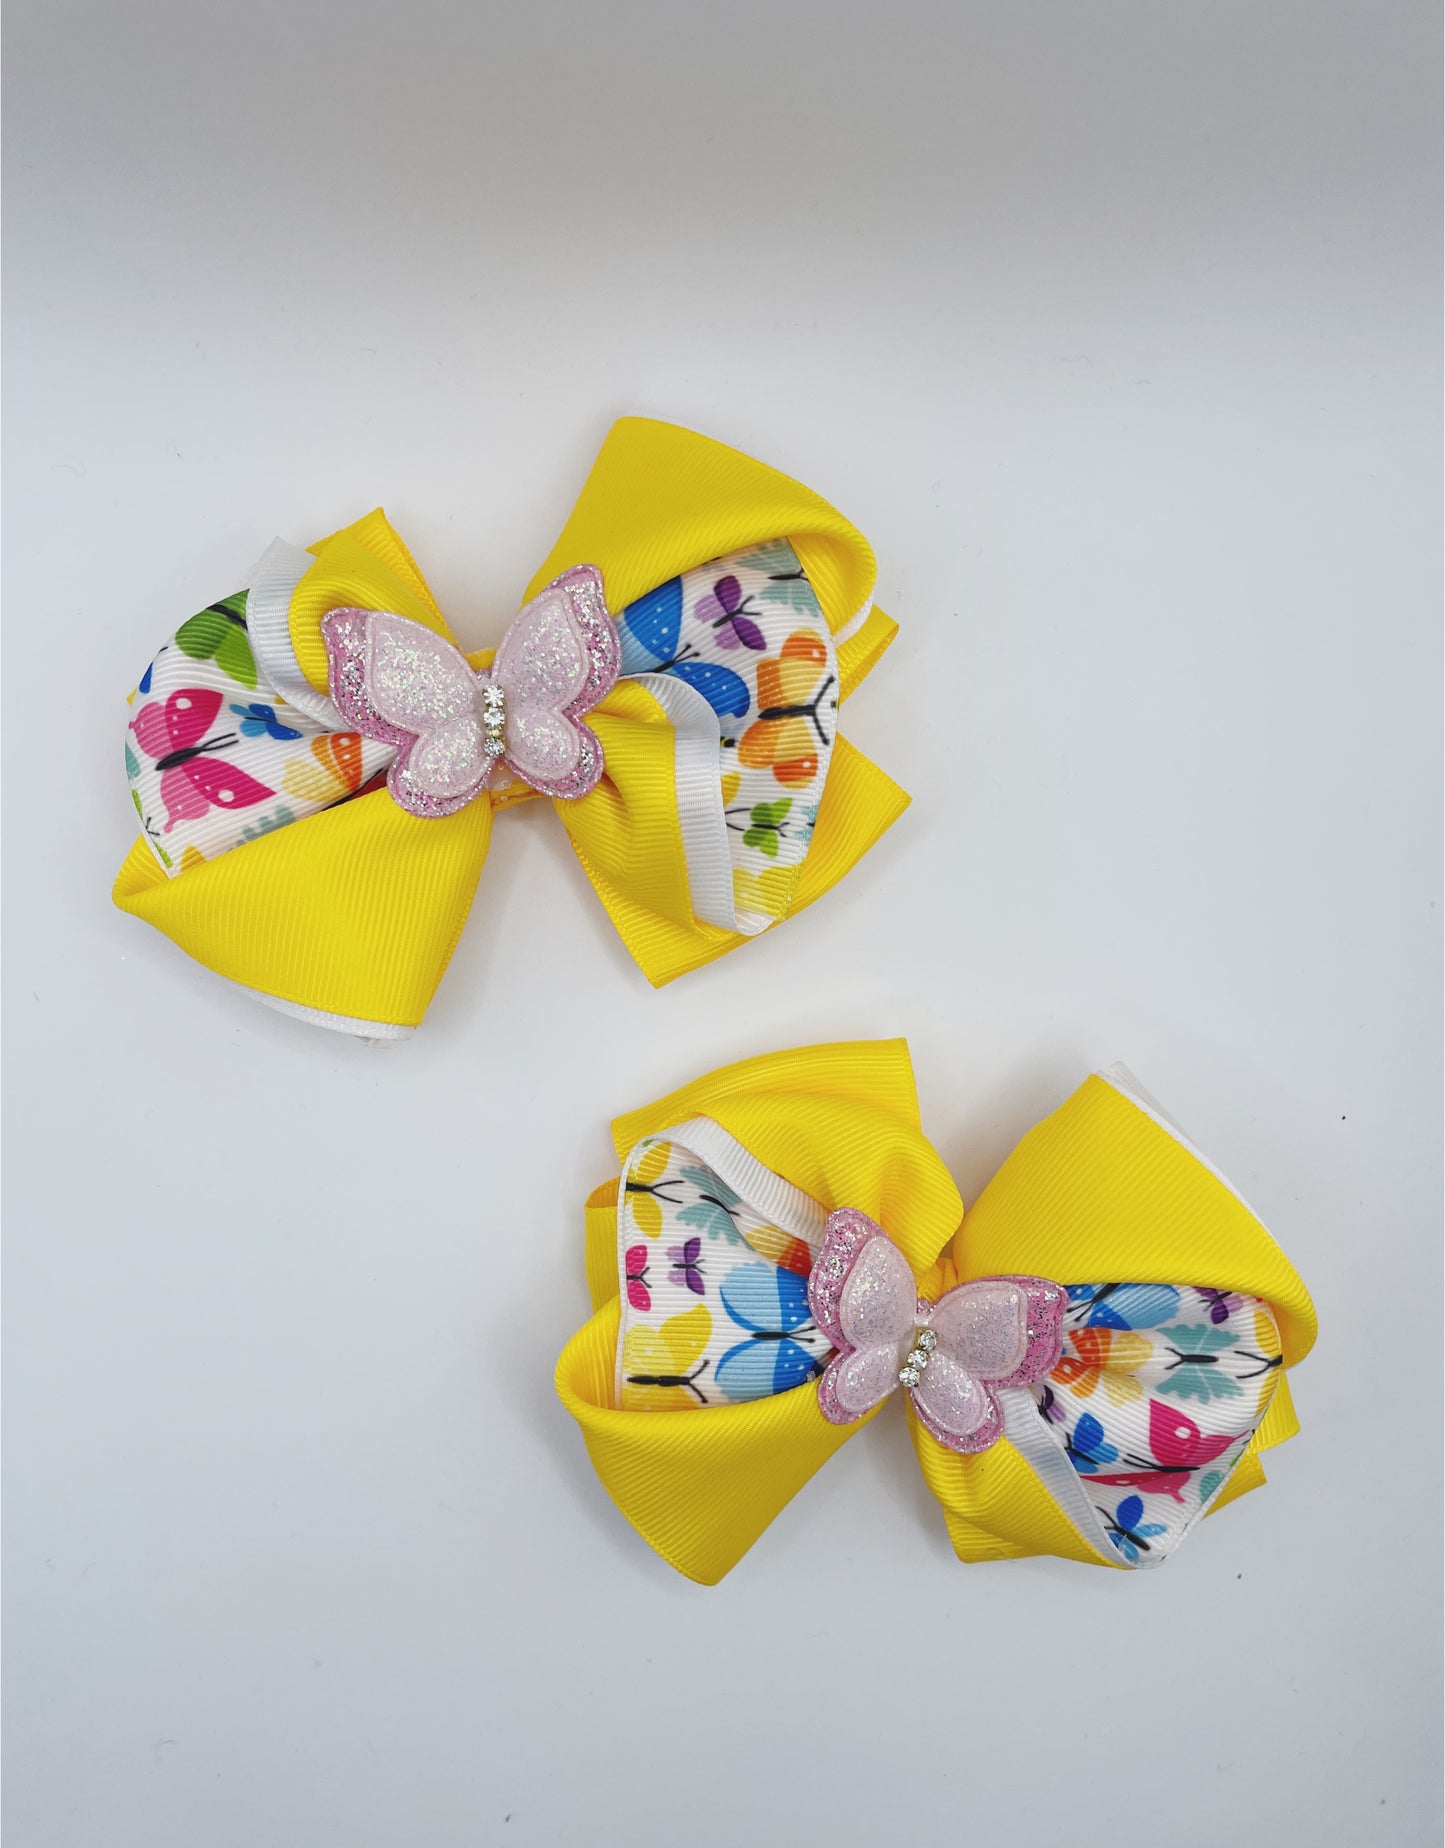 Pair of Bows for Girls Handmade Girl Hair Bow Pair Yellow Pair of Bows for Infants Toddlers Kids Teens Butterfly Inspired Pair of Bows for Girl Hair Bows for Girl